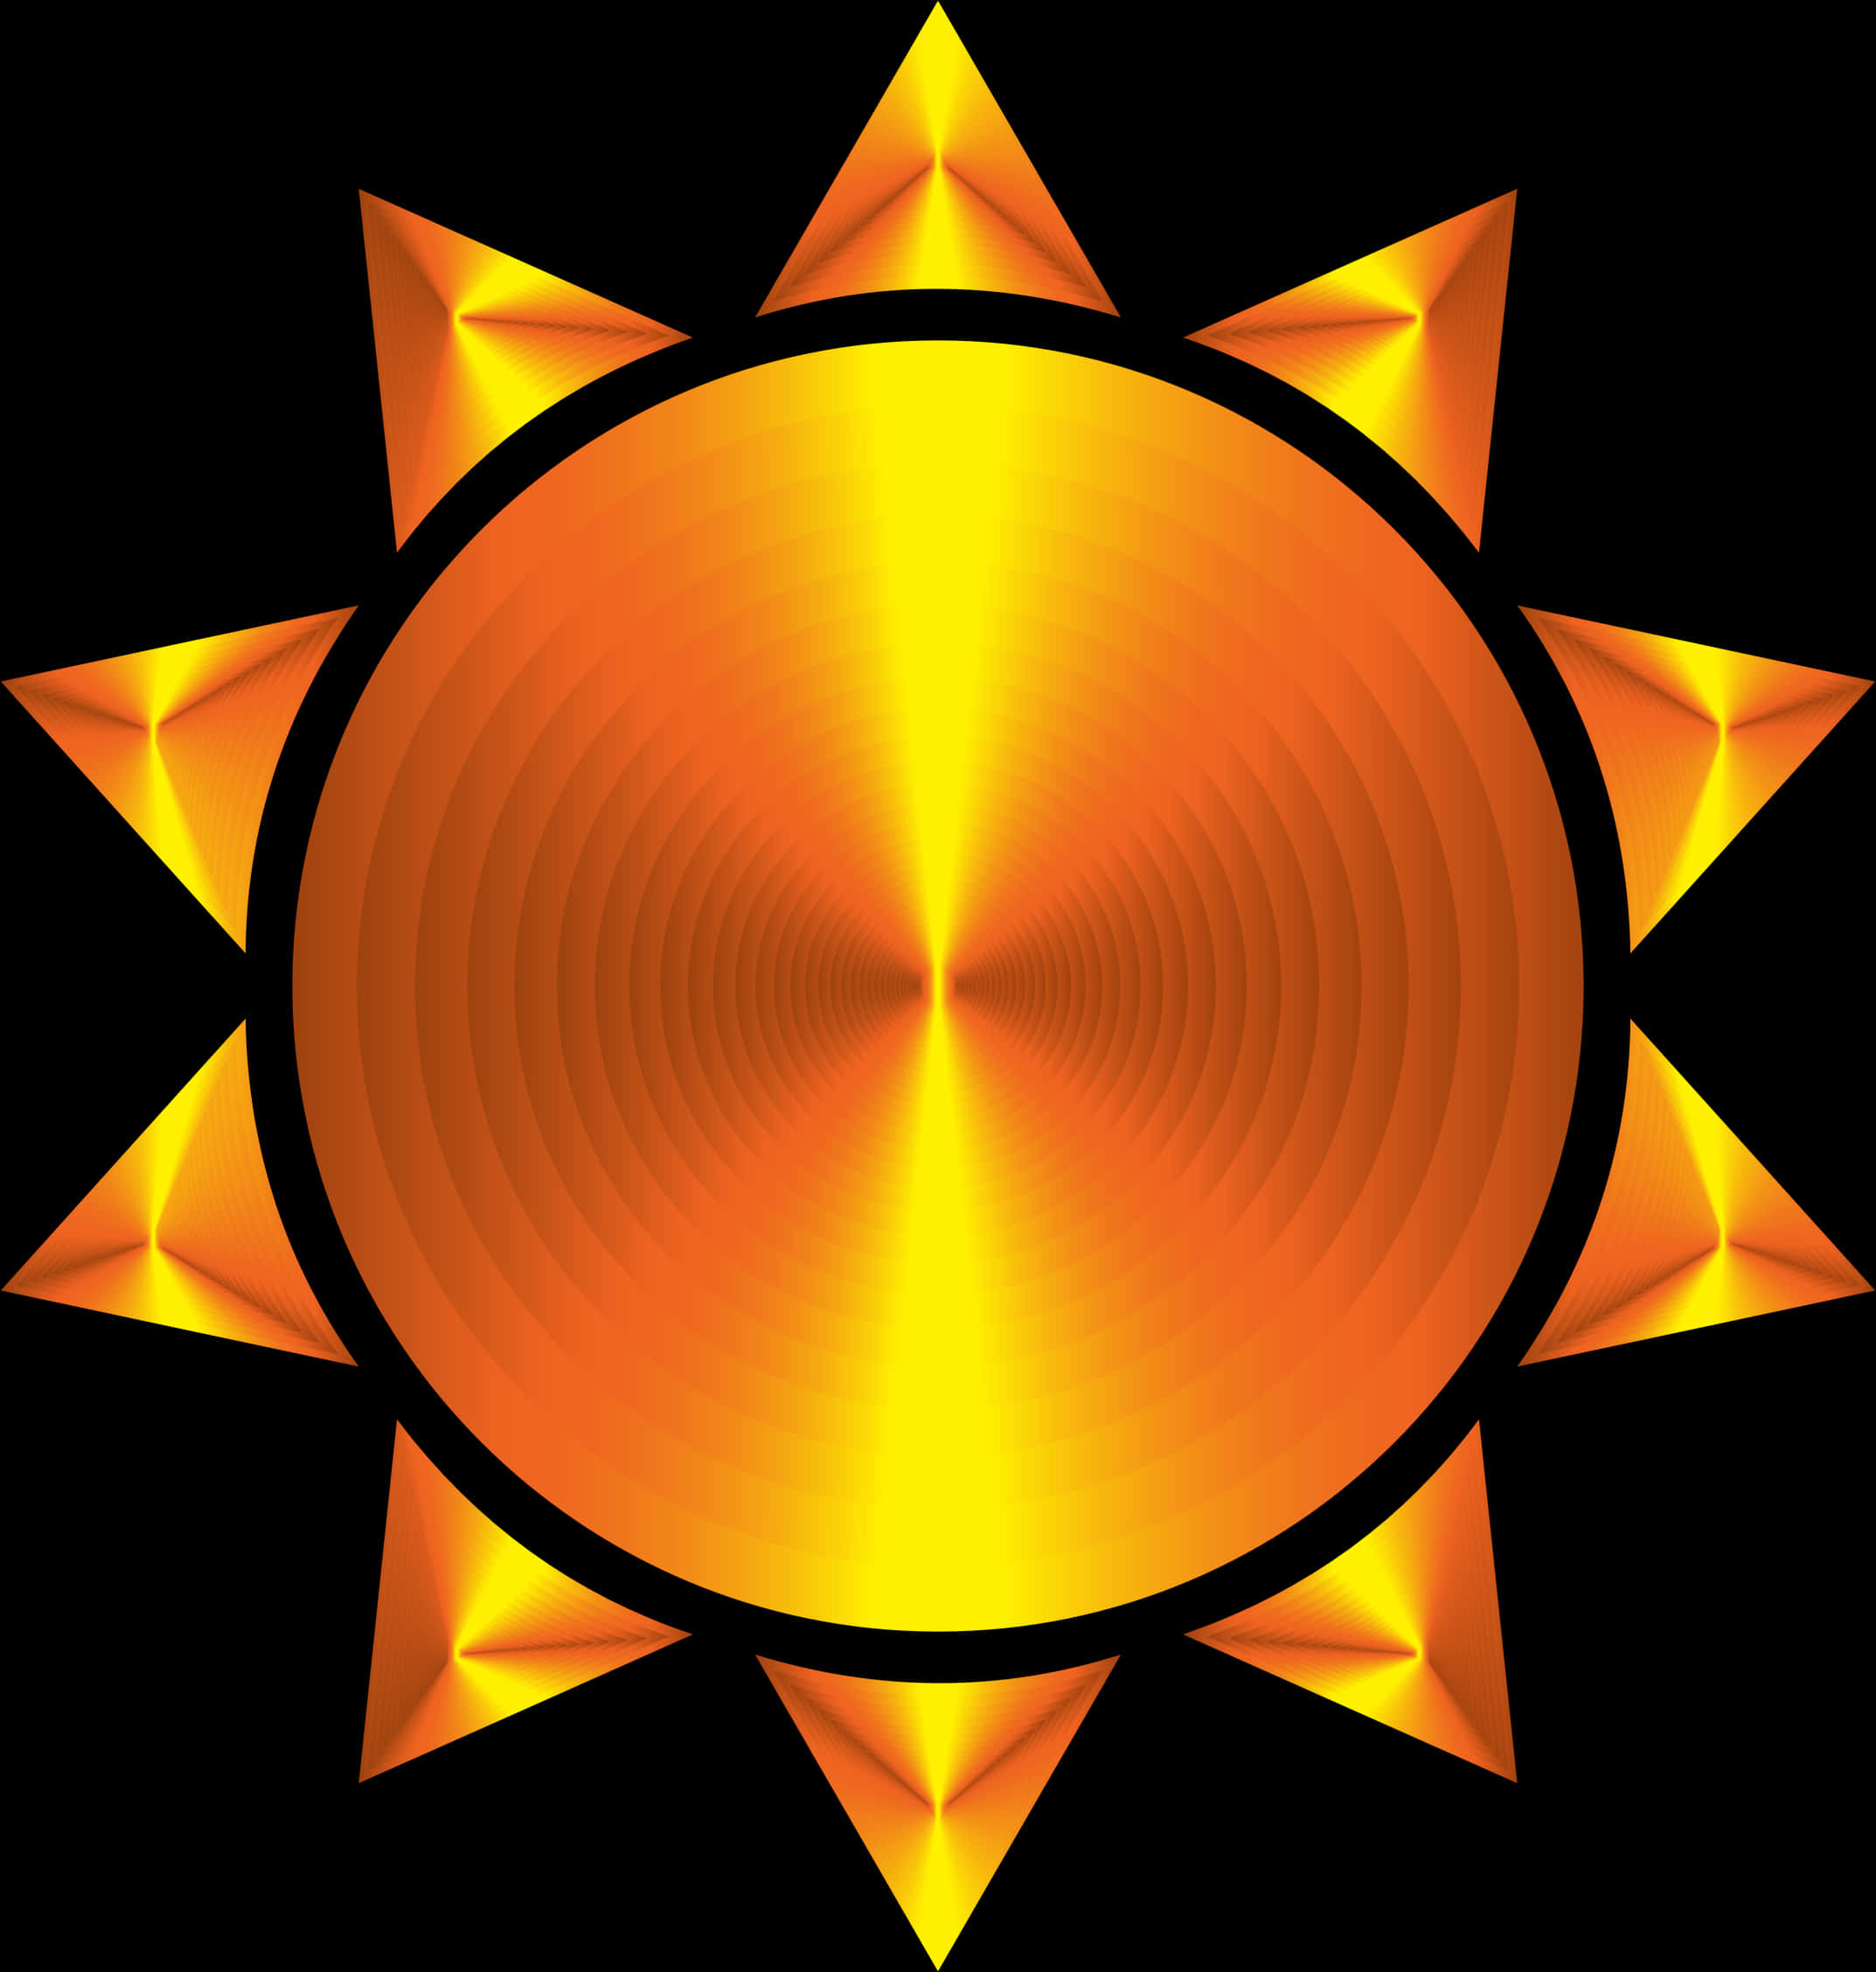 A Yellow And Orange Sun With Black Background